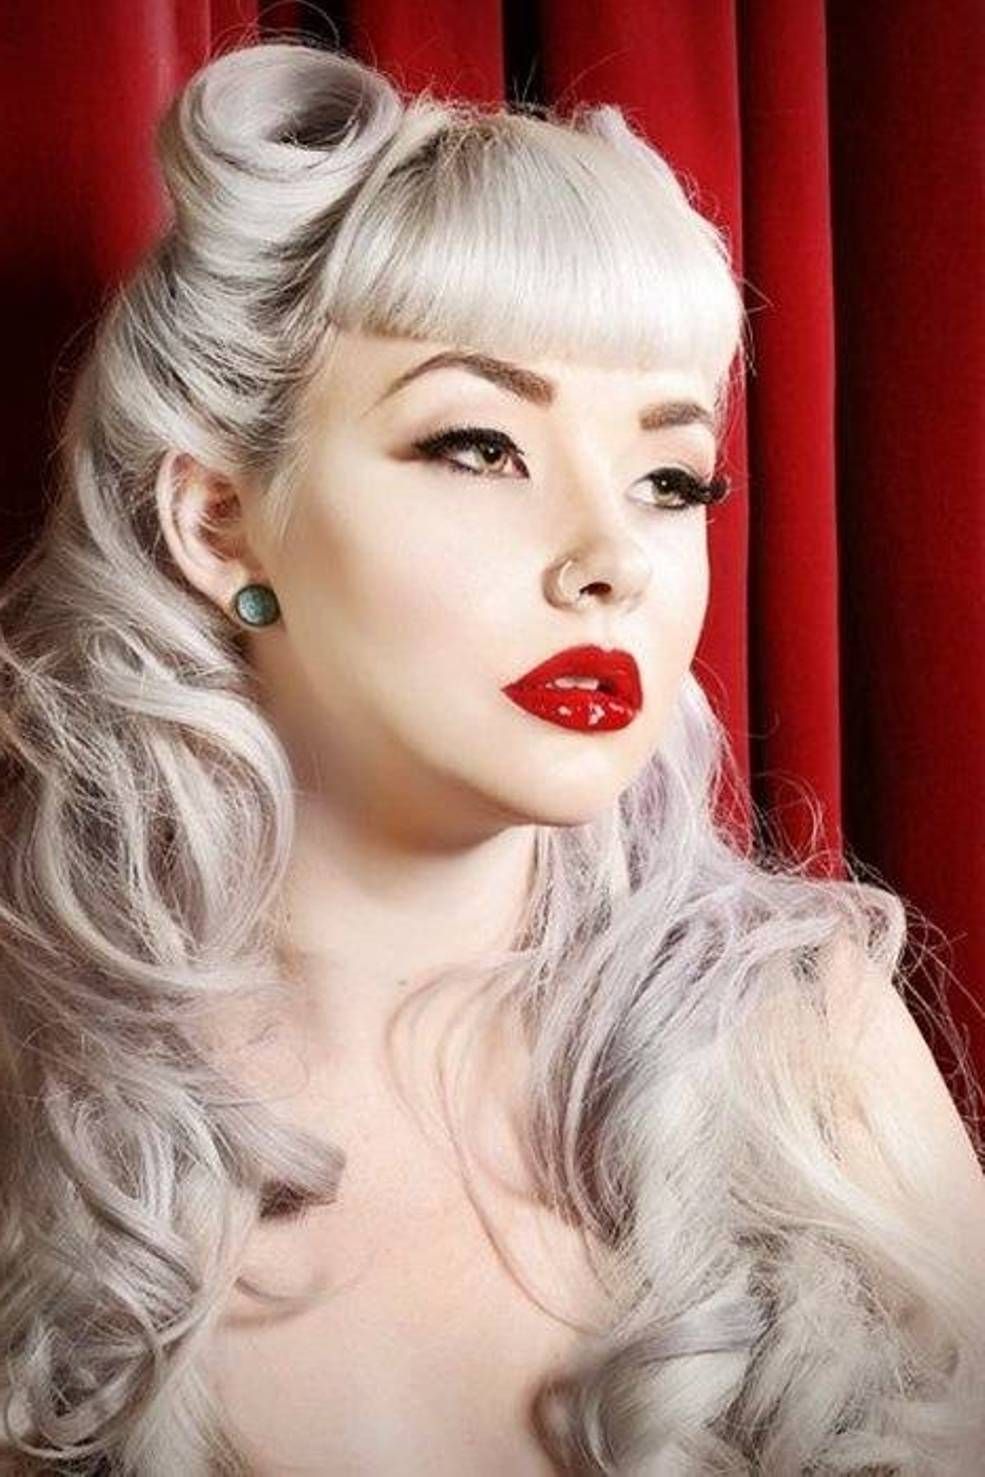 rockabilly-pin-up-hairstyles-63_13 Rockabilly pin up hairstyles